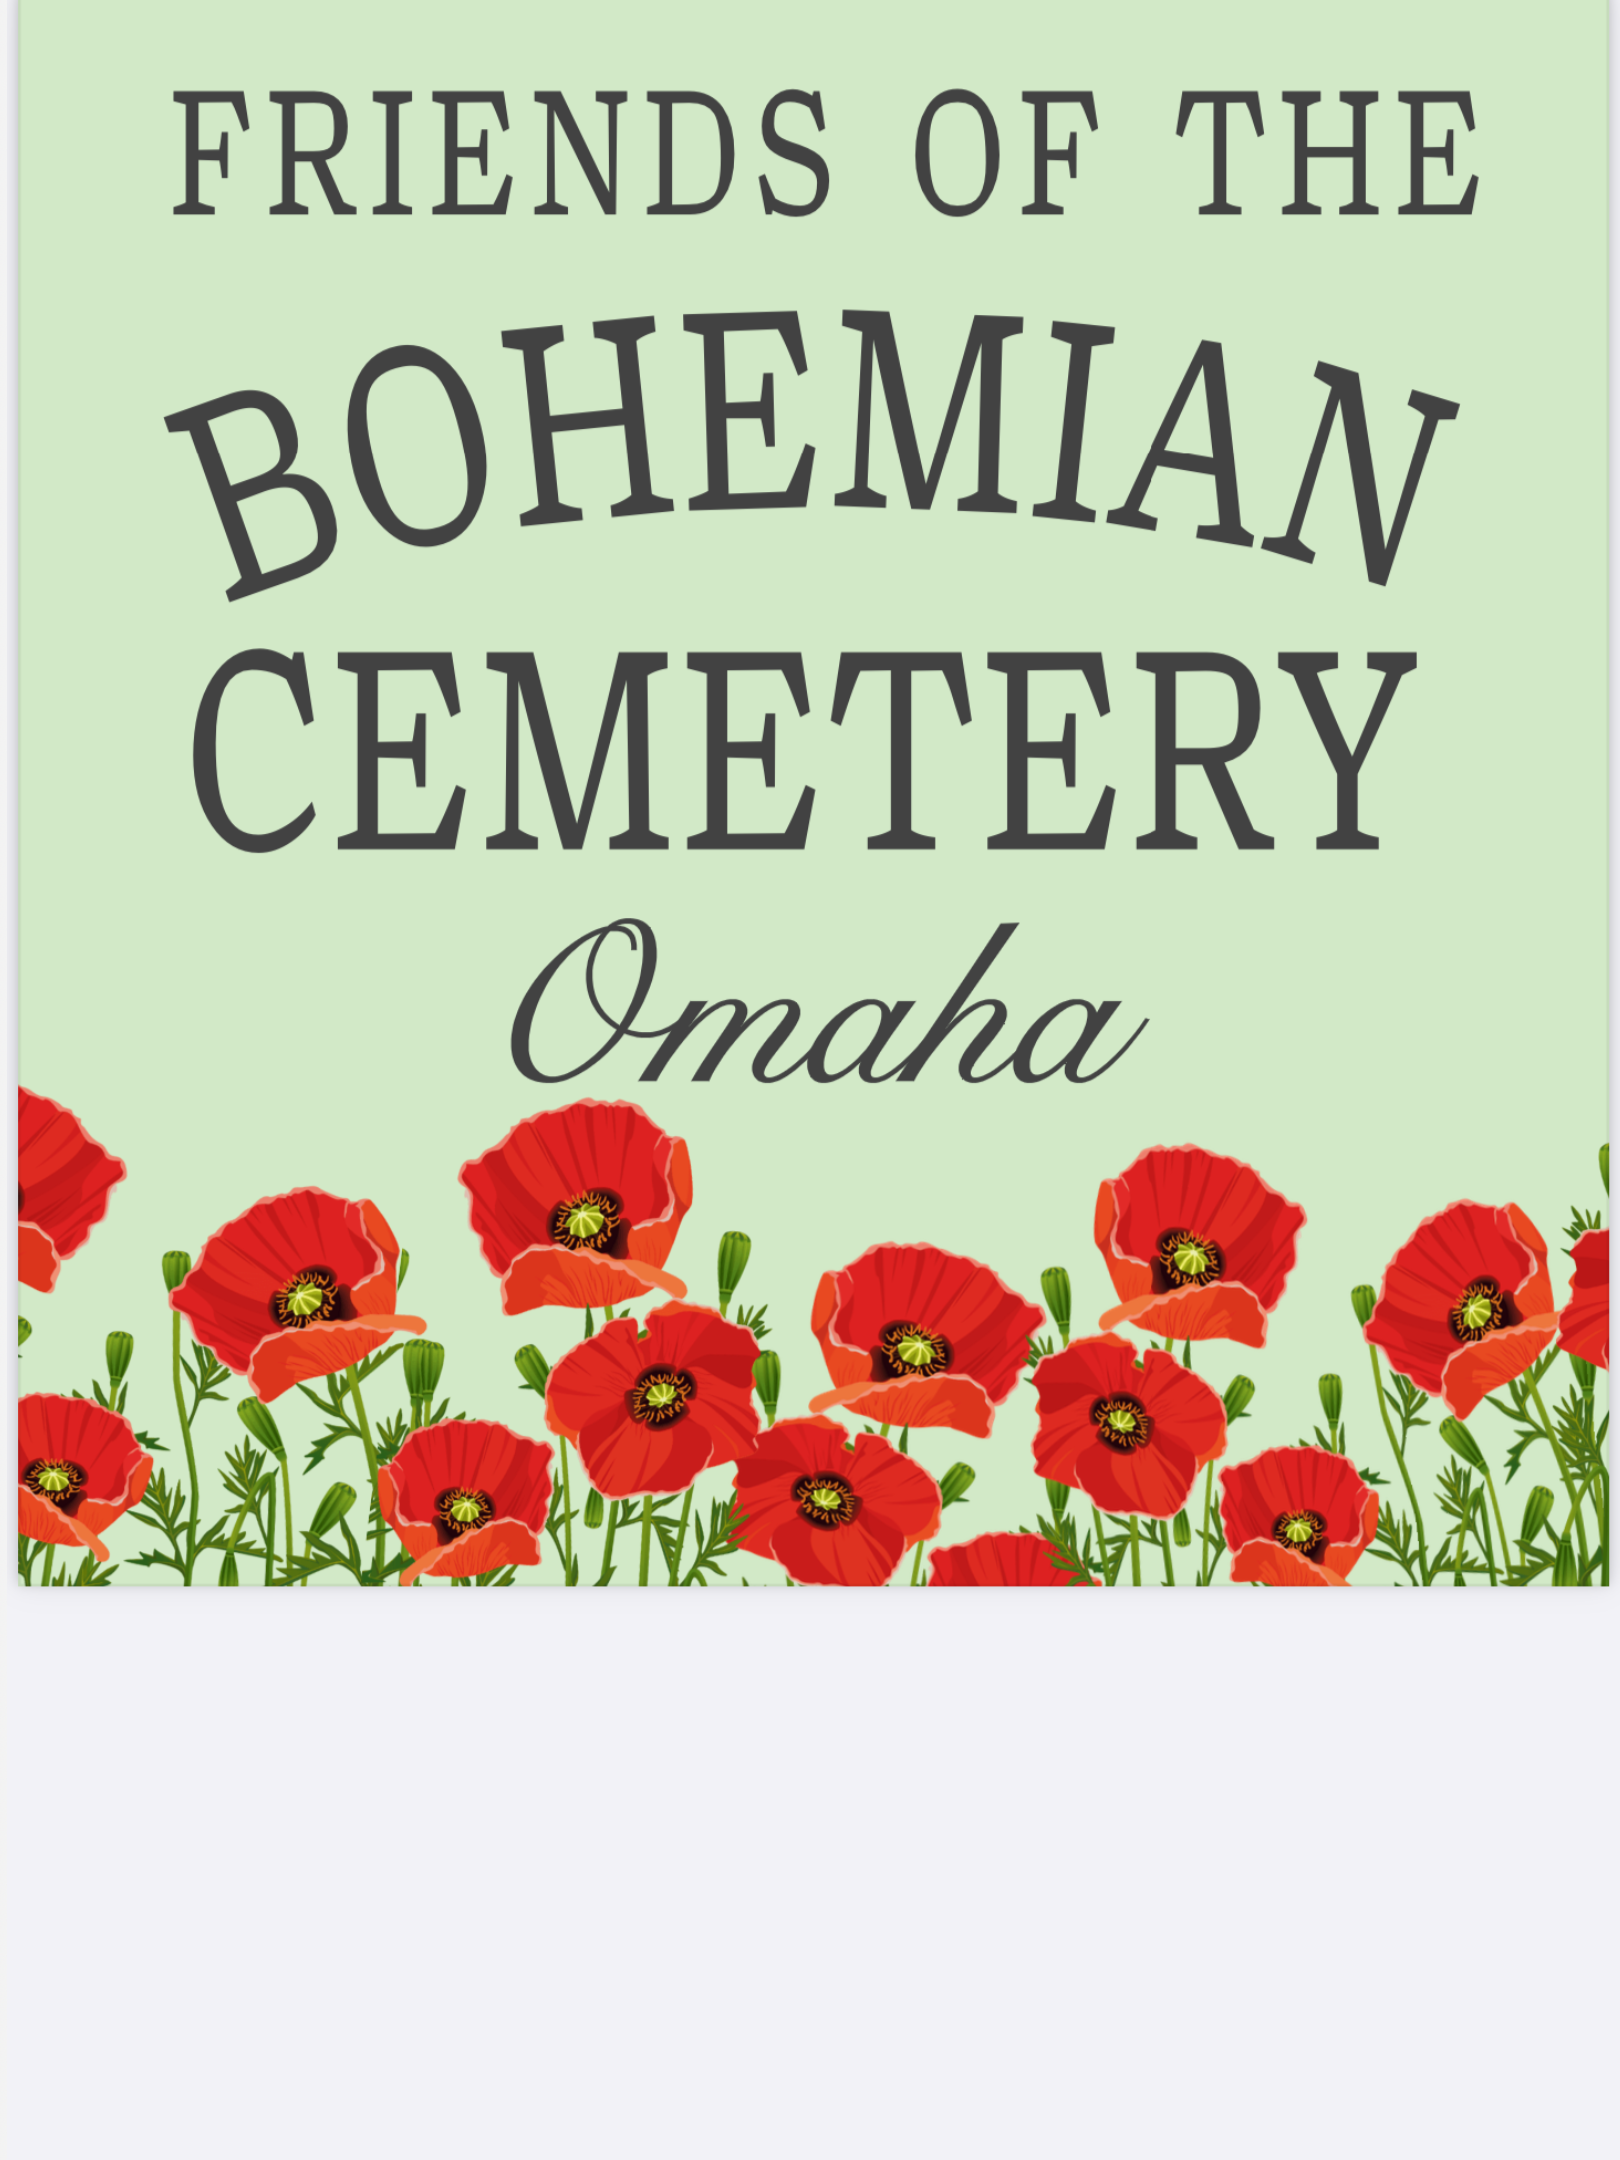 Friends of the Bohemian Cemetery